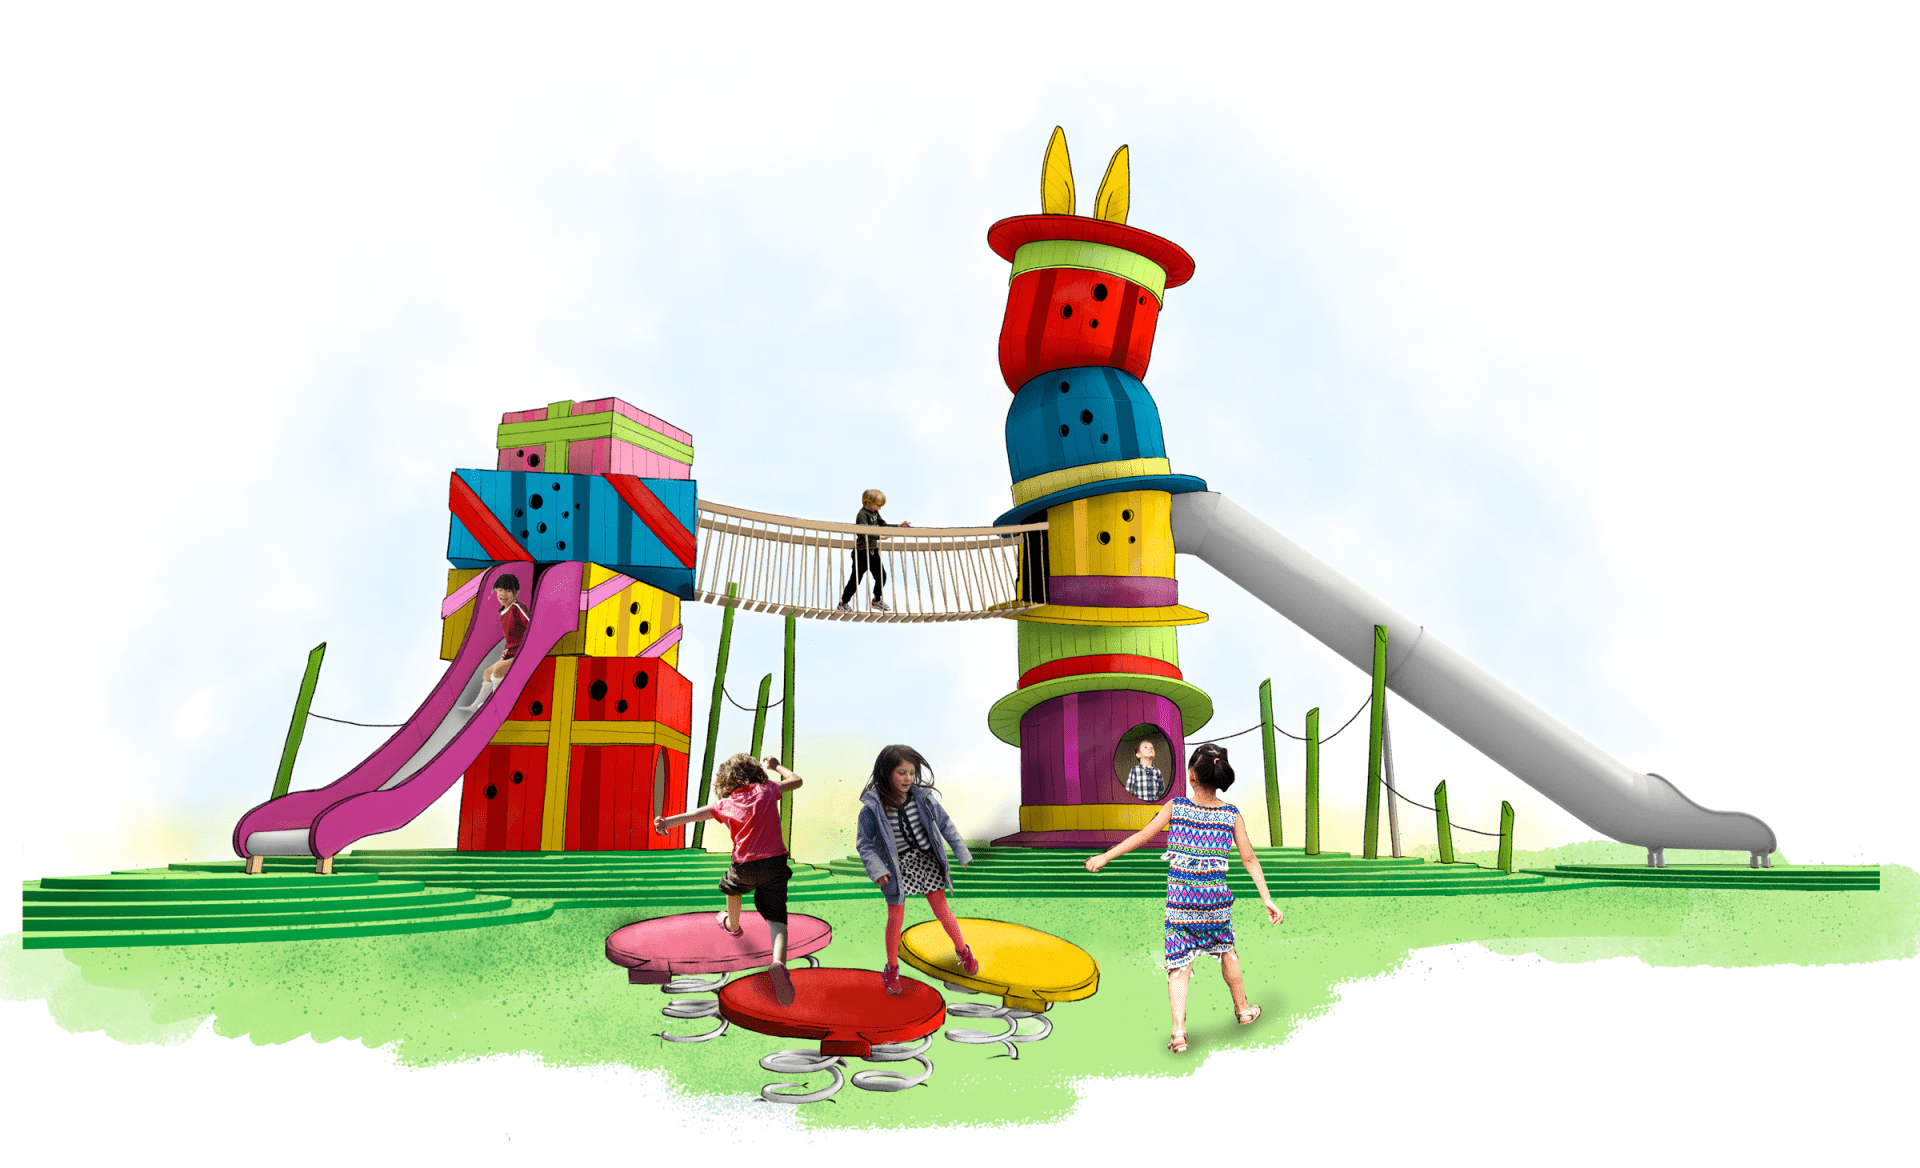 Rendered visualisation of playground design with towers of gifts and hats